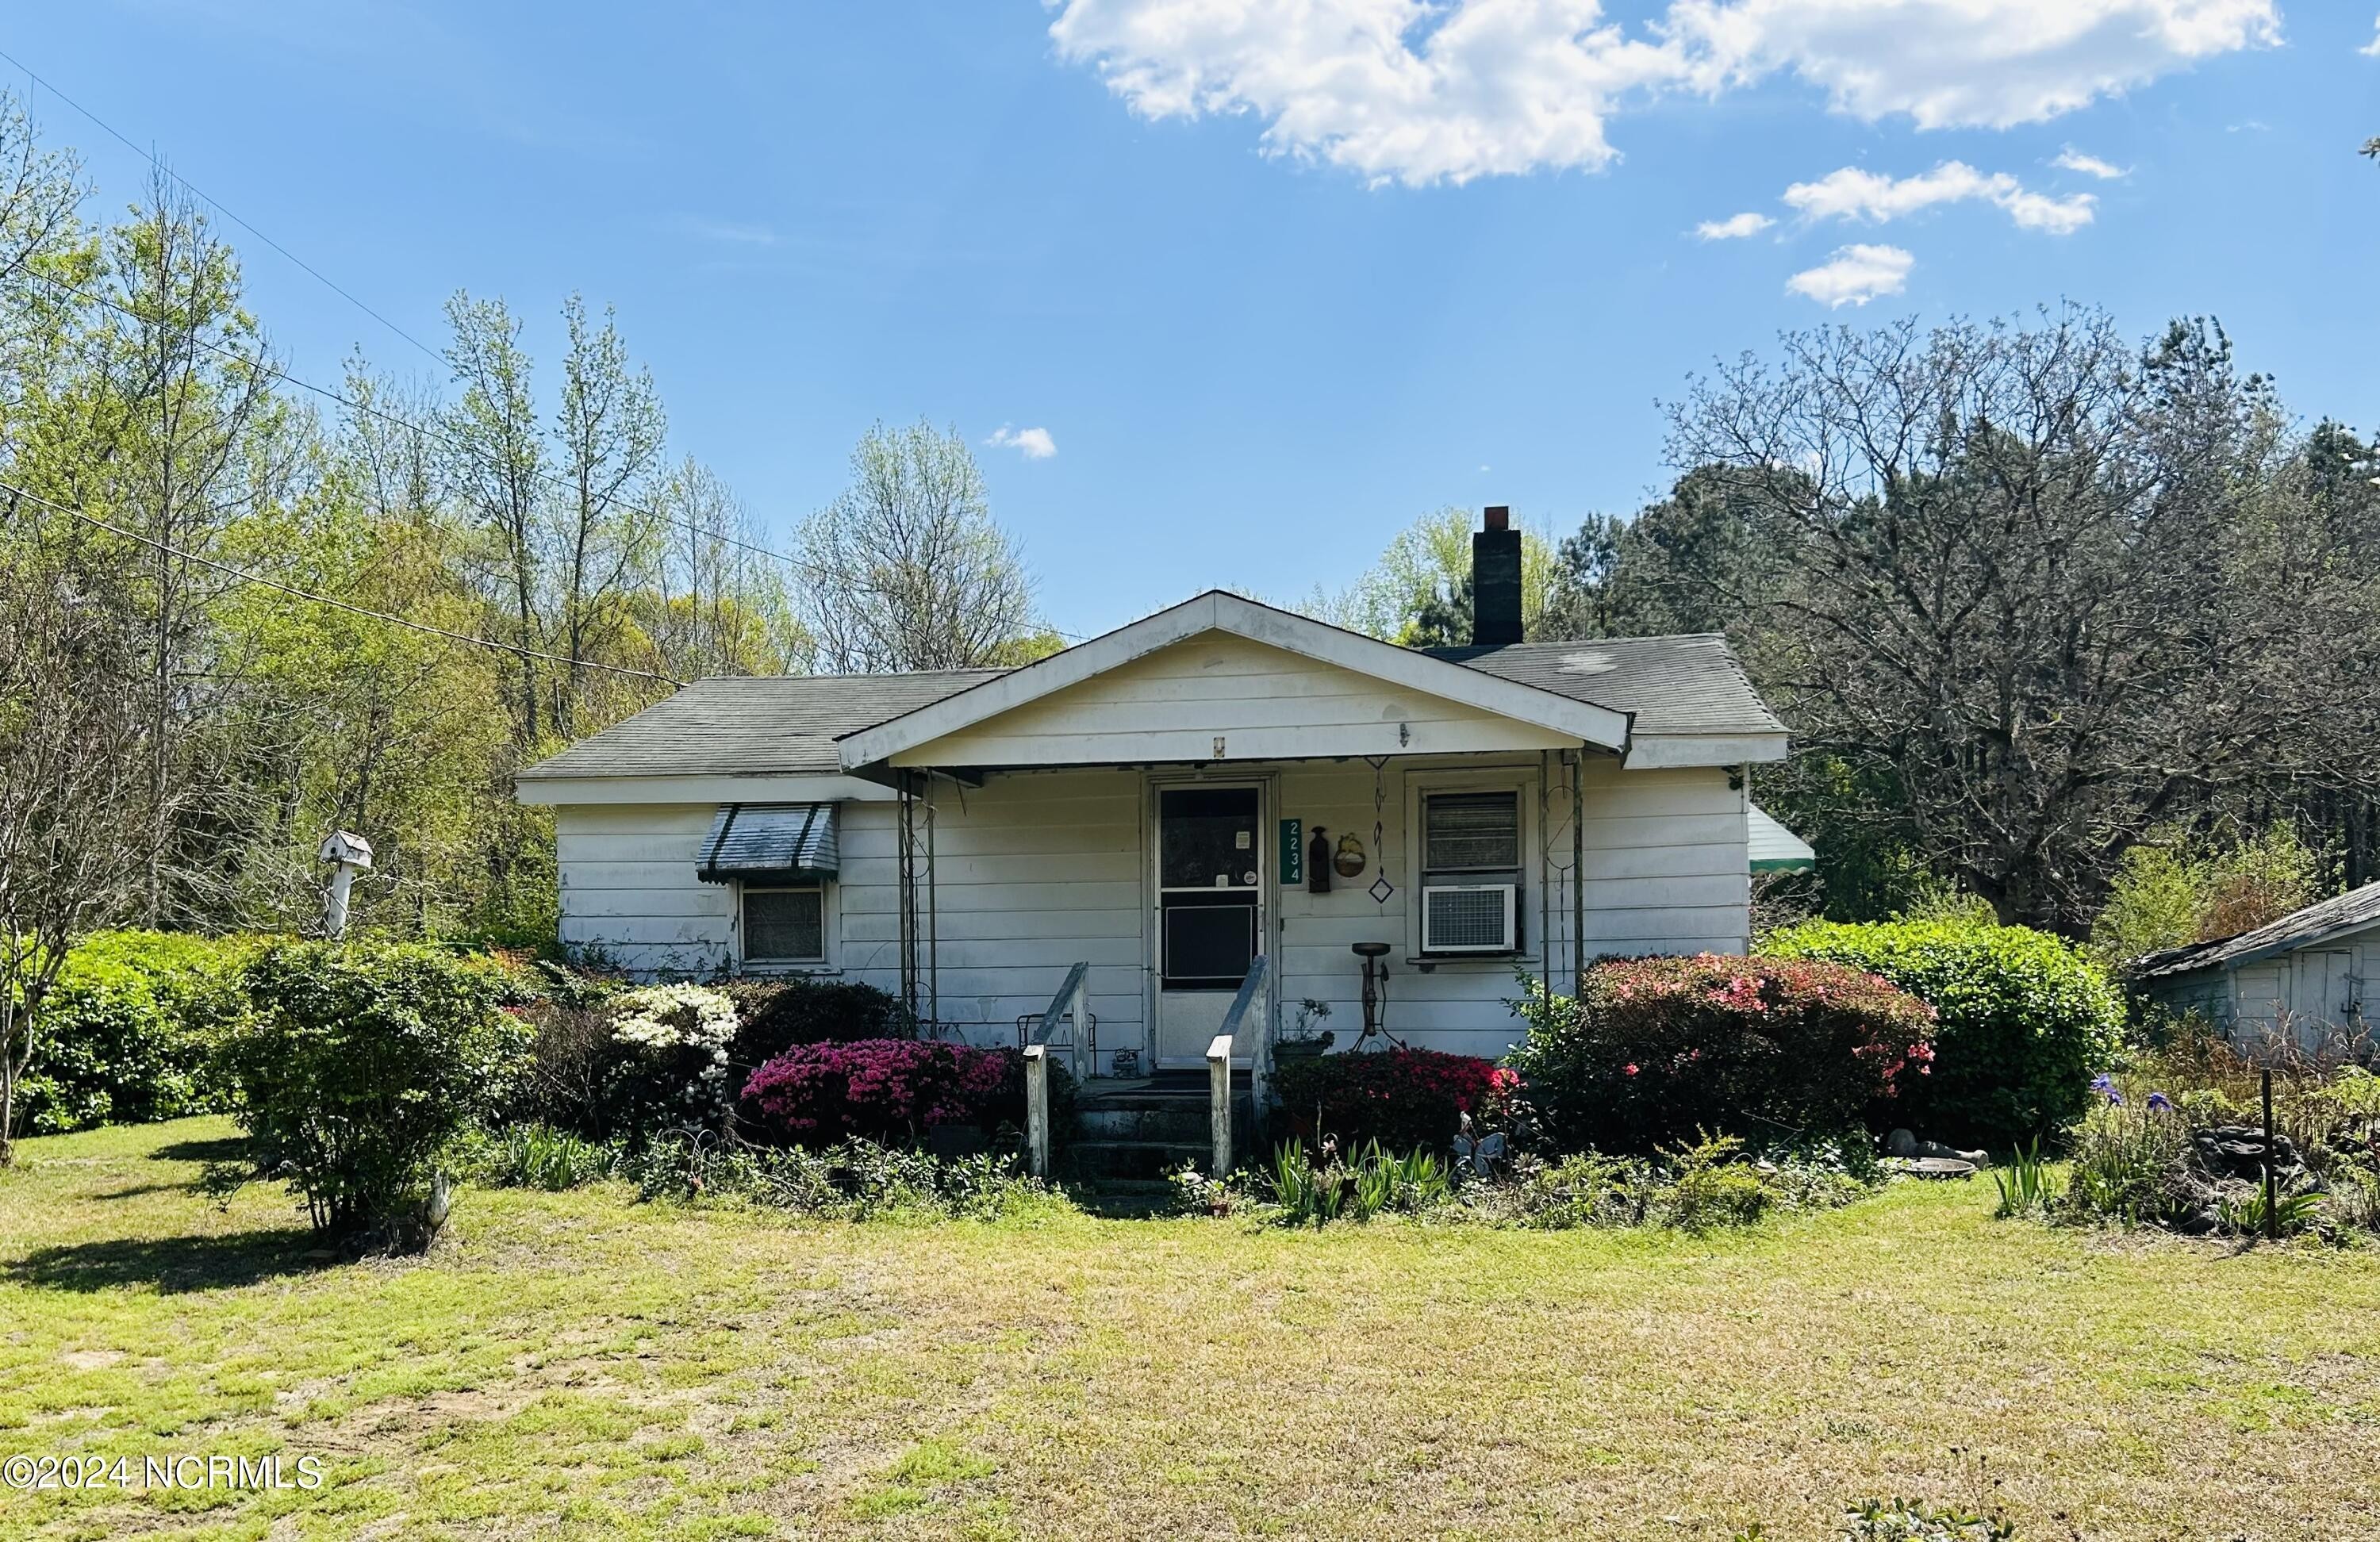 1. 2234 Pinpoint Road